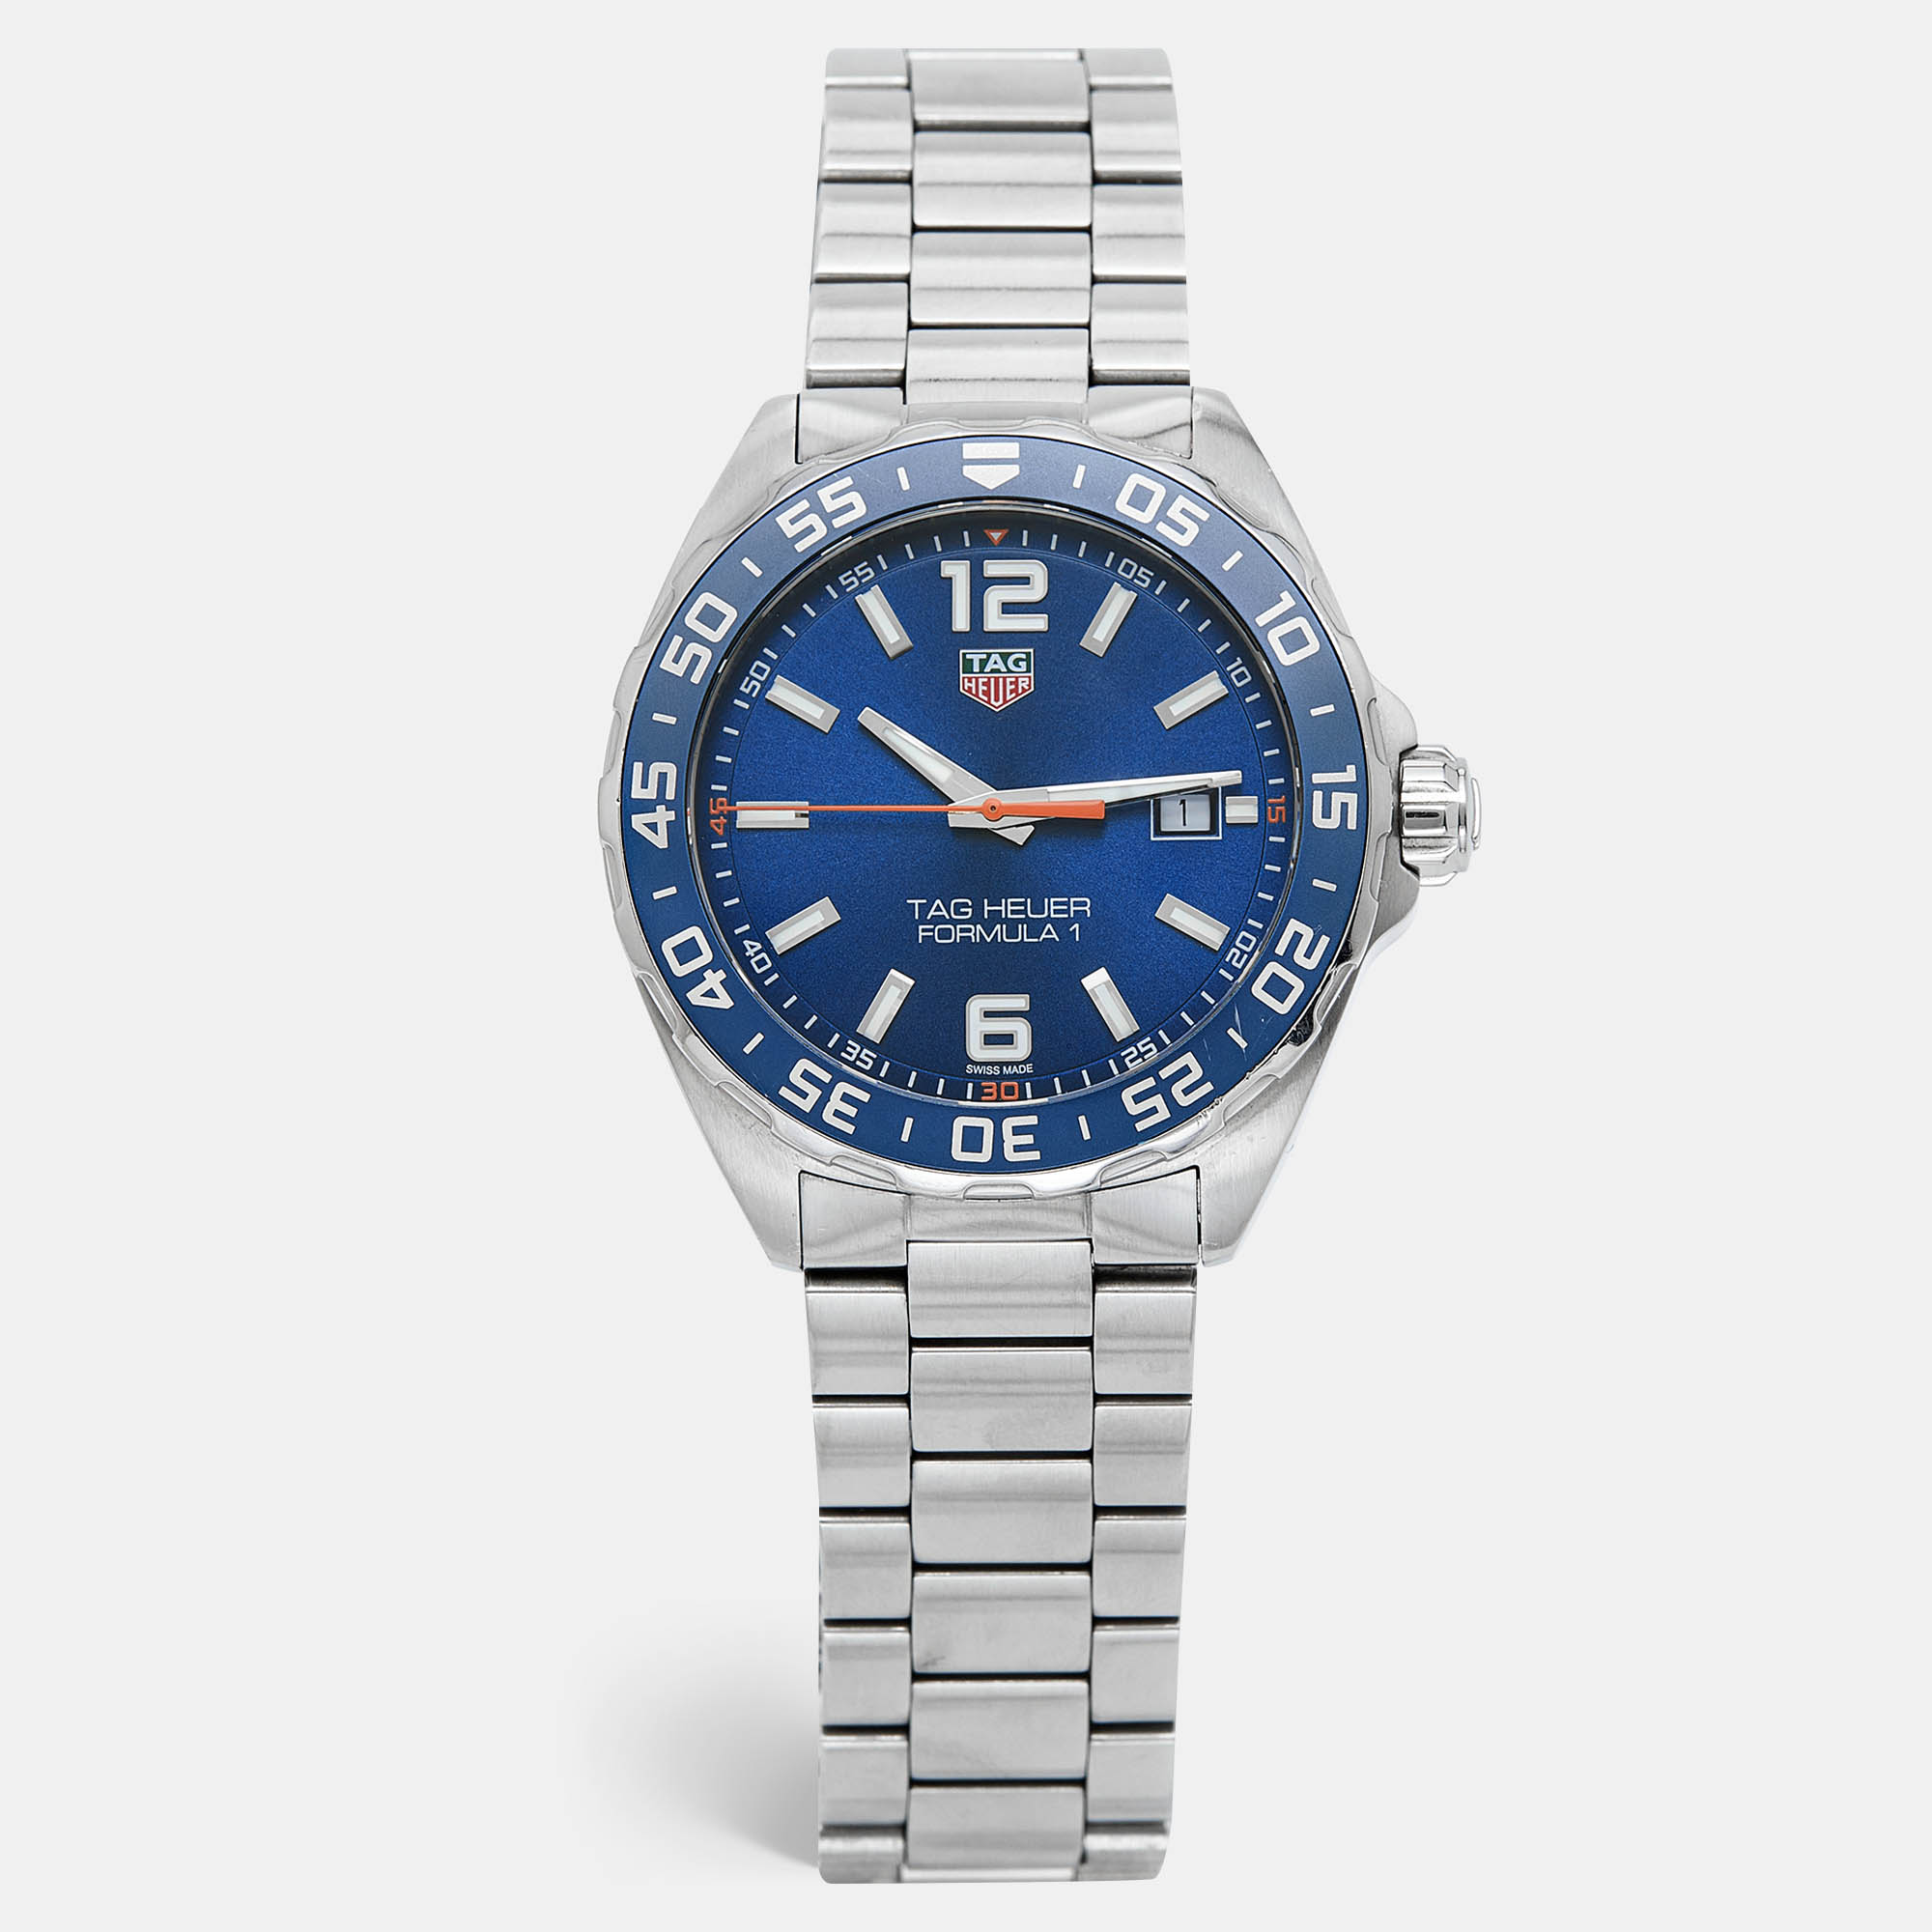 Let this authentic luxury timepiece help you make every moment count Created with skill using high grade materials this watch is a functional accessory designed to impart a luxurious style while keeping you on time.